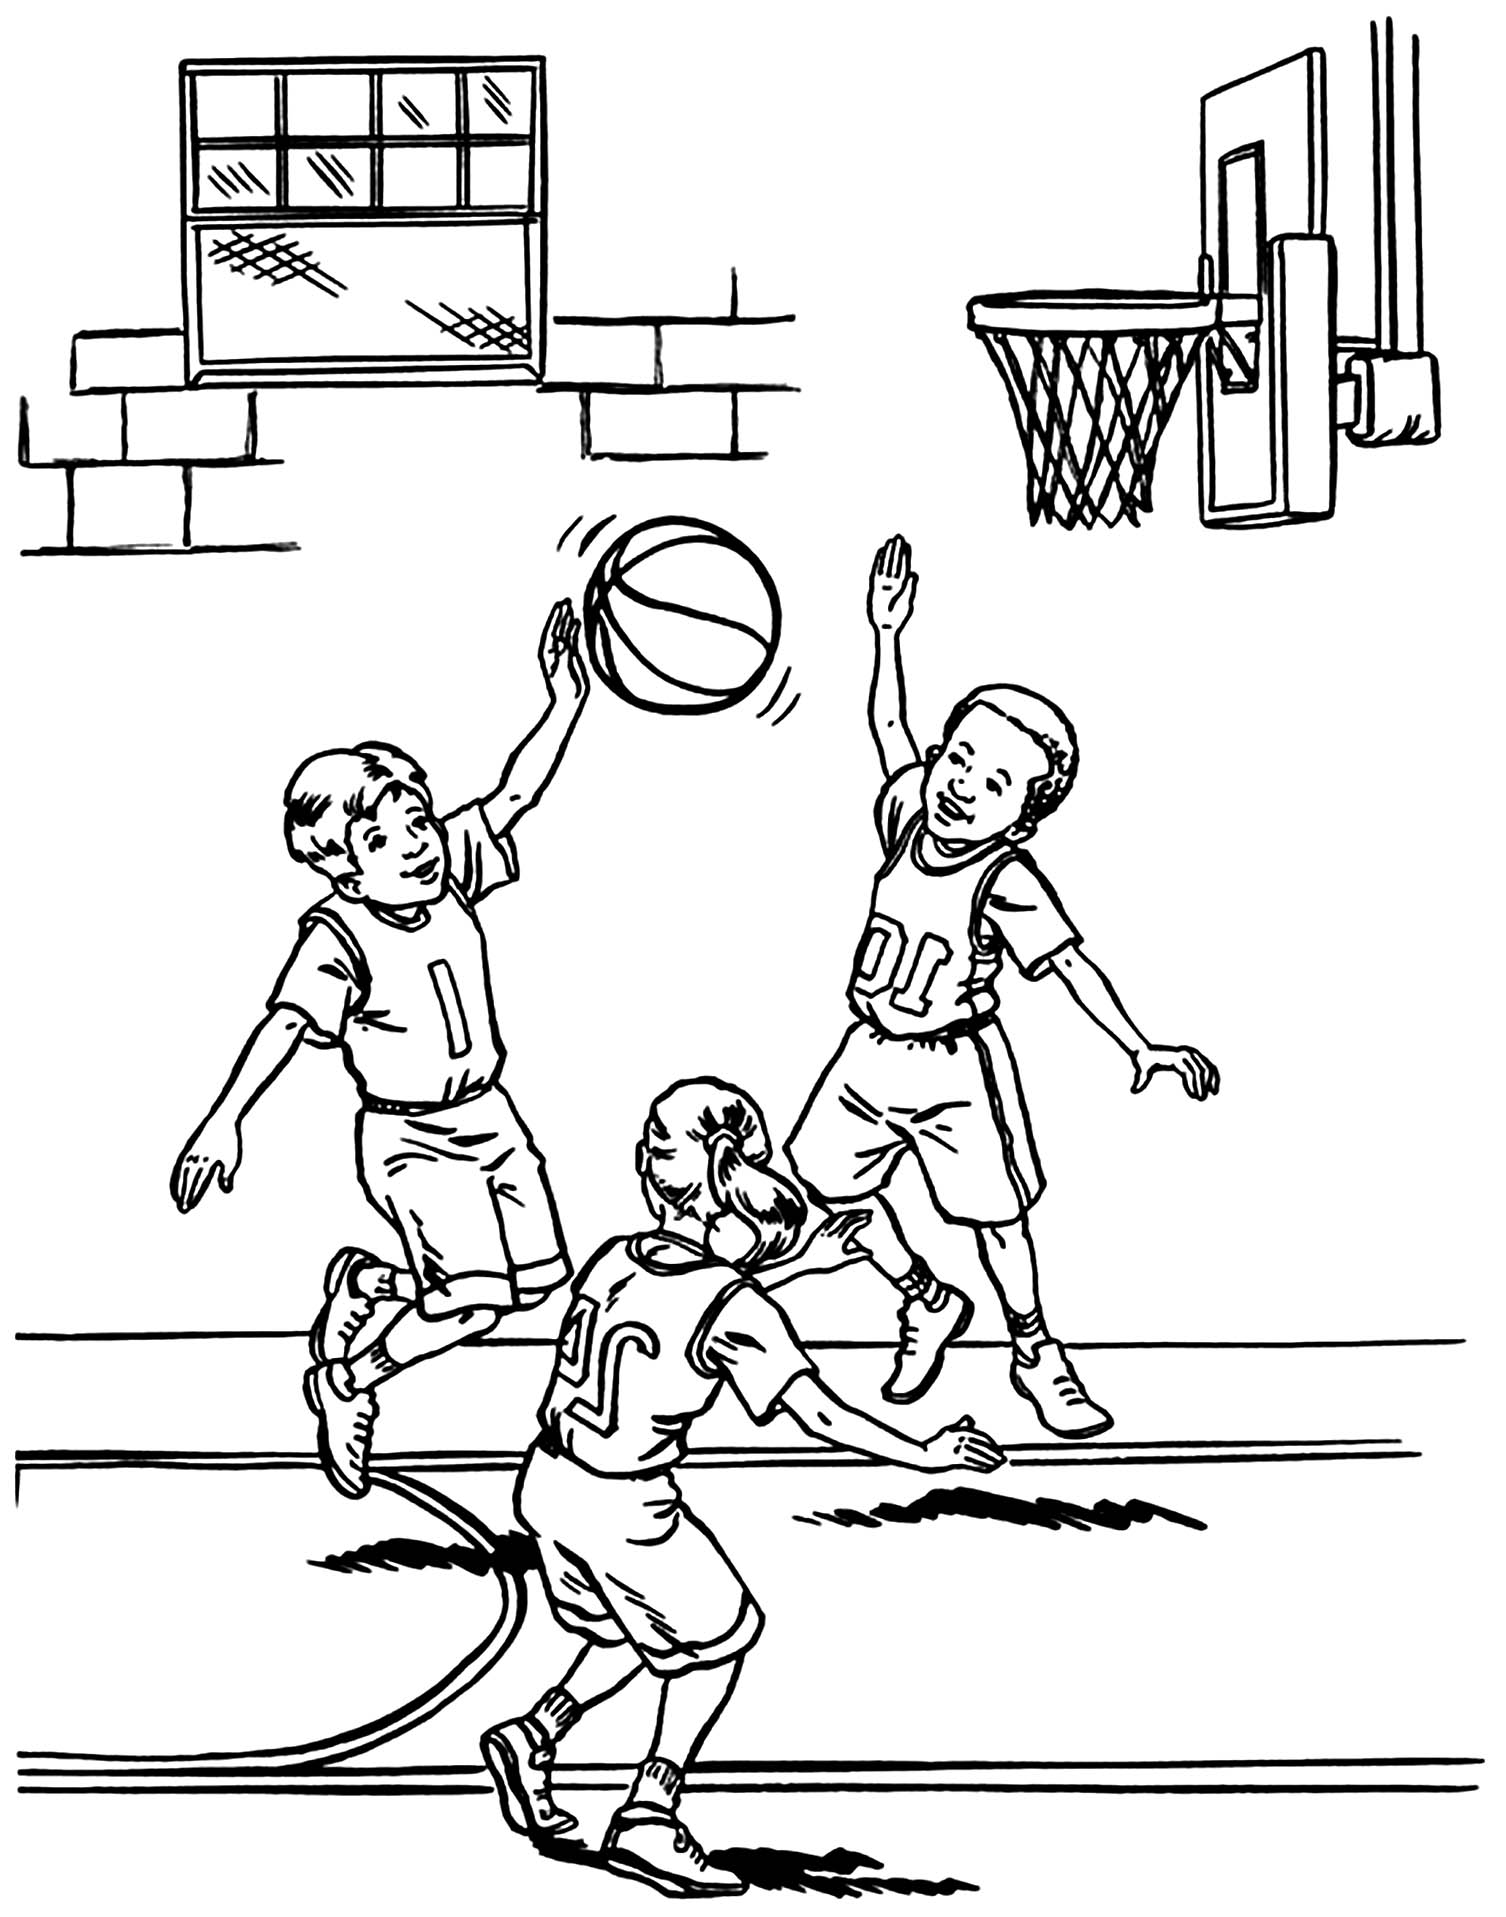 Printable basketball coloring pages for kids - Basketball Kids Coloring ...